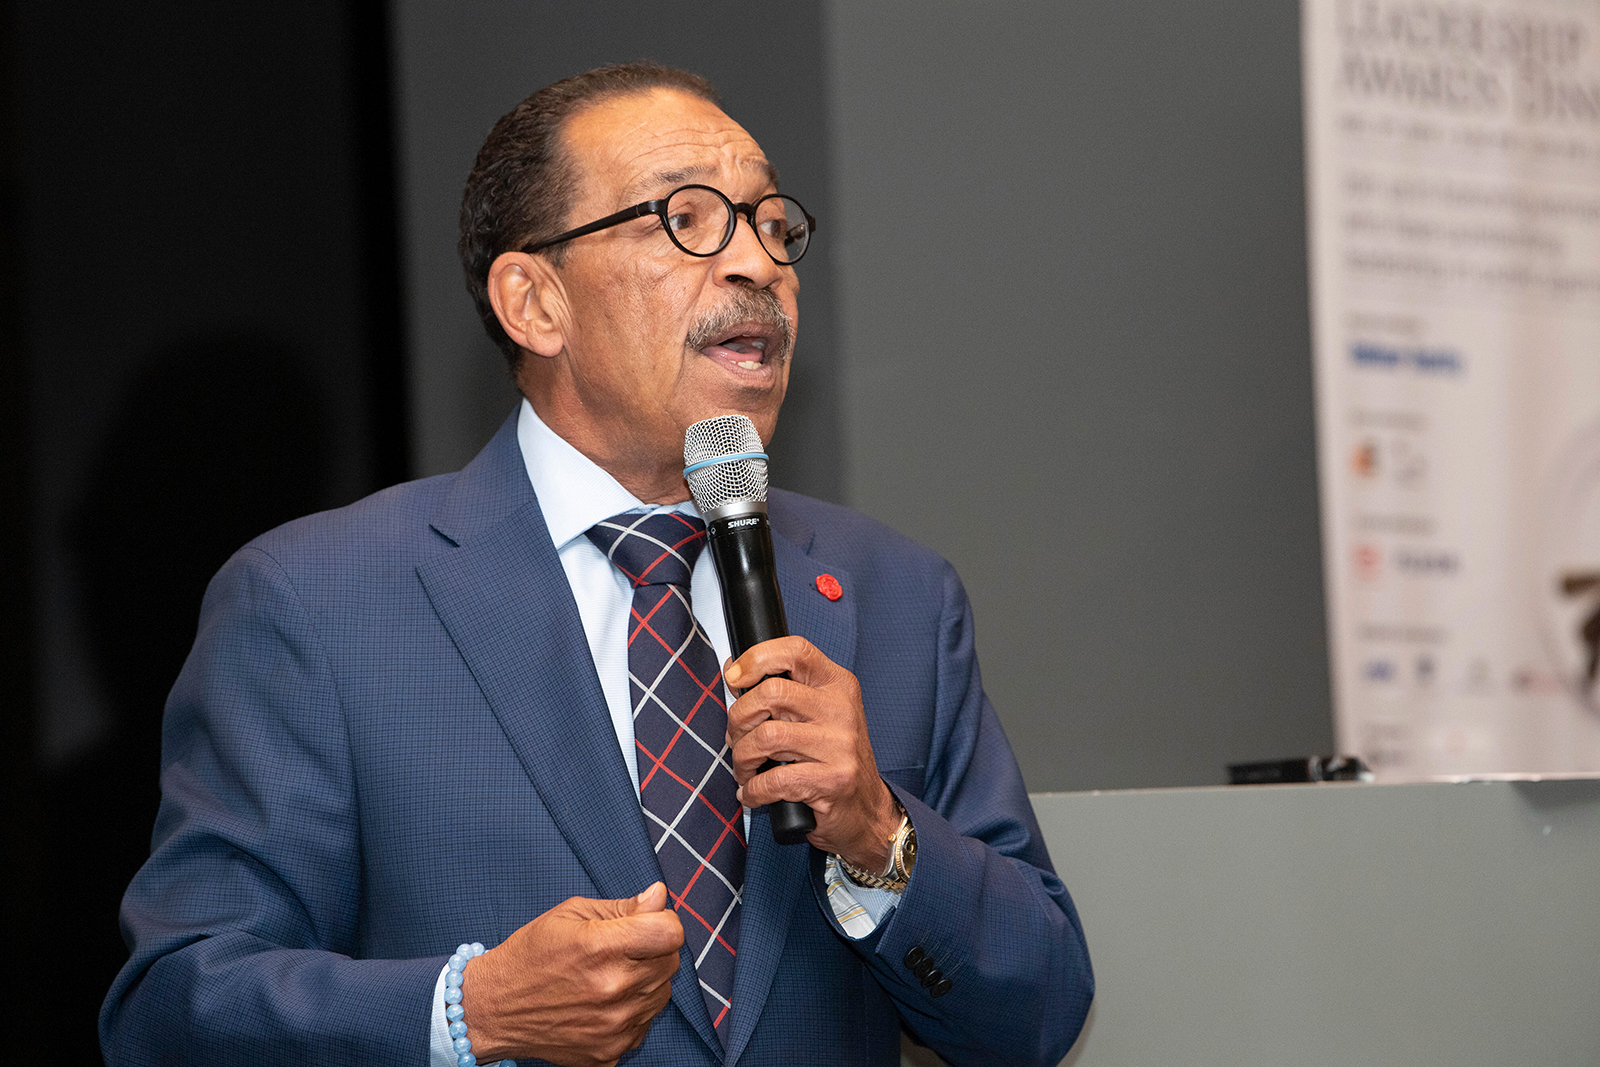 Los Angeles City Council President Herb Wesson Jr. speaks at the City Club in Los Angeles, on December 3, 2019